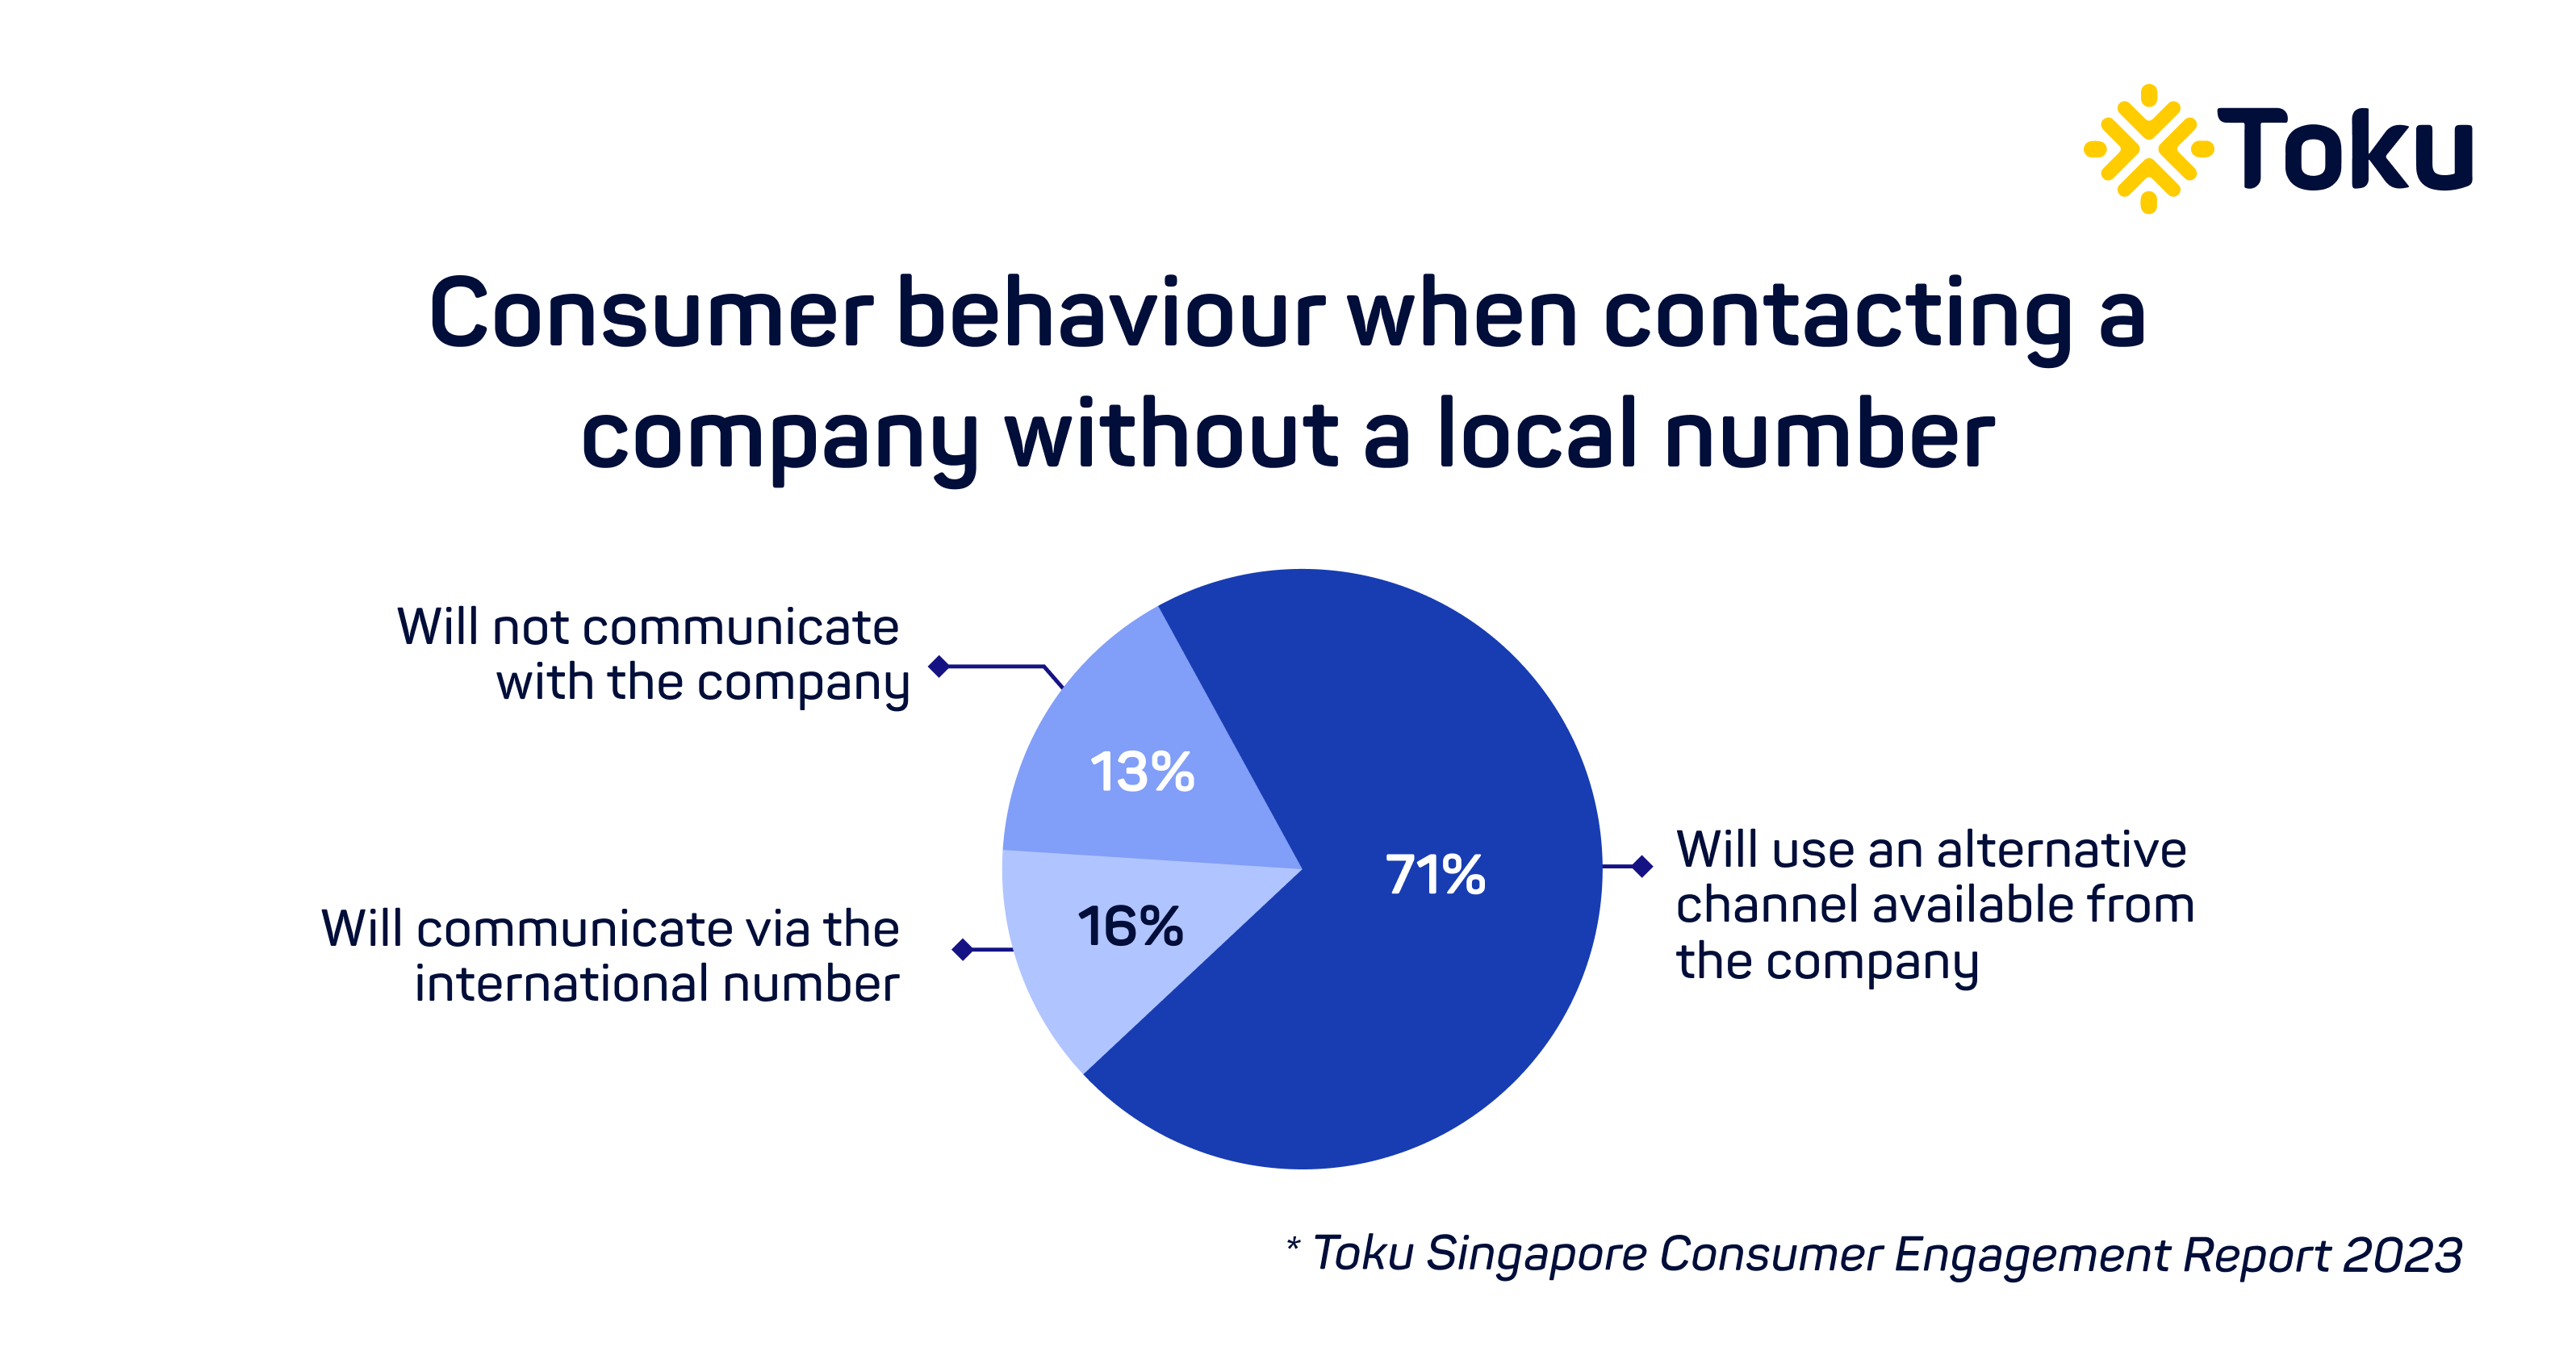 Consumer behaviour when contacting a company without local number